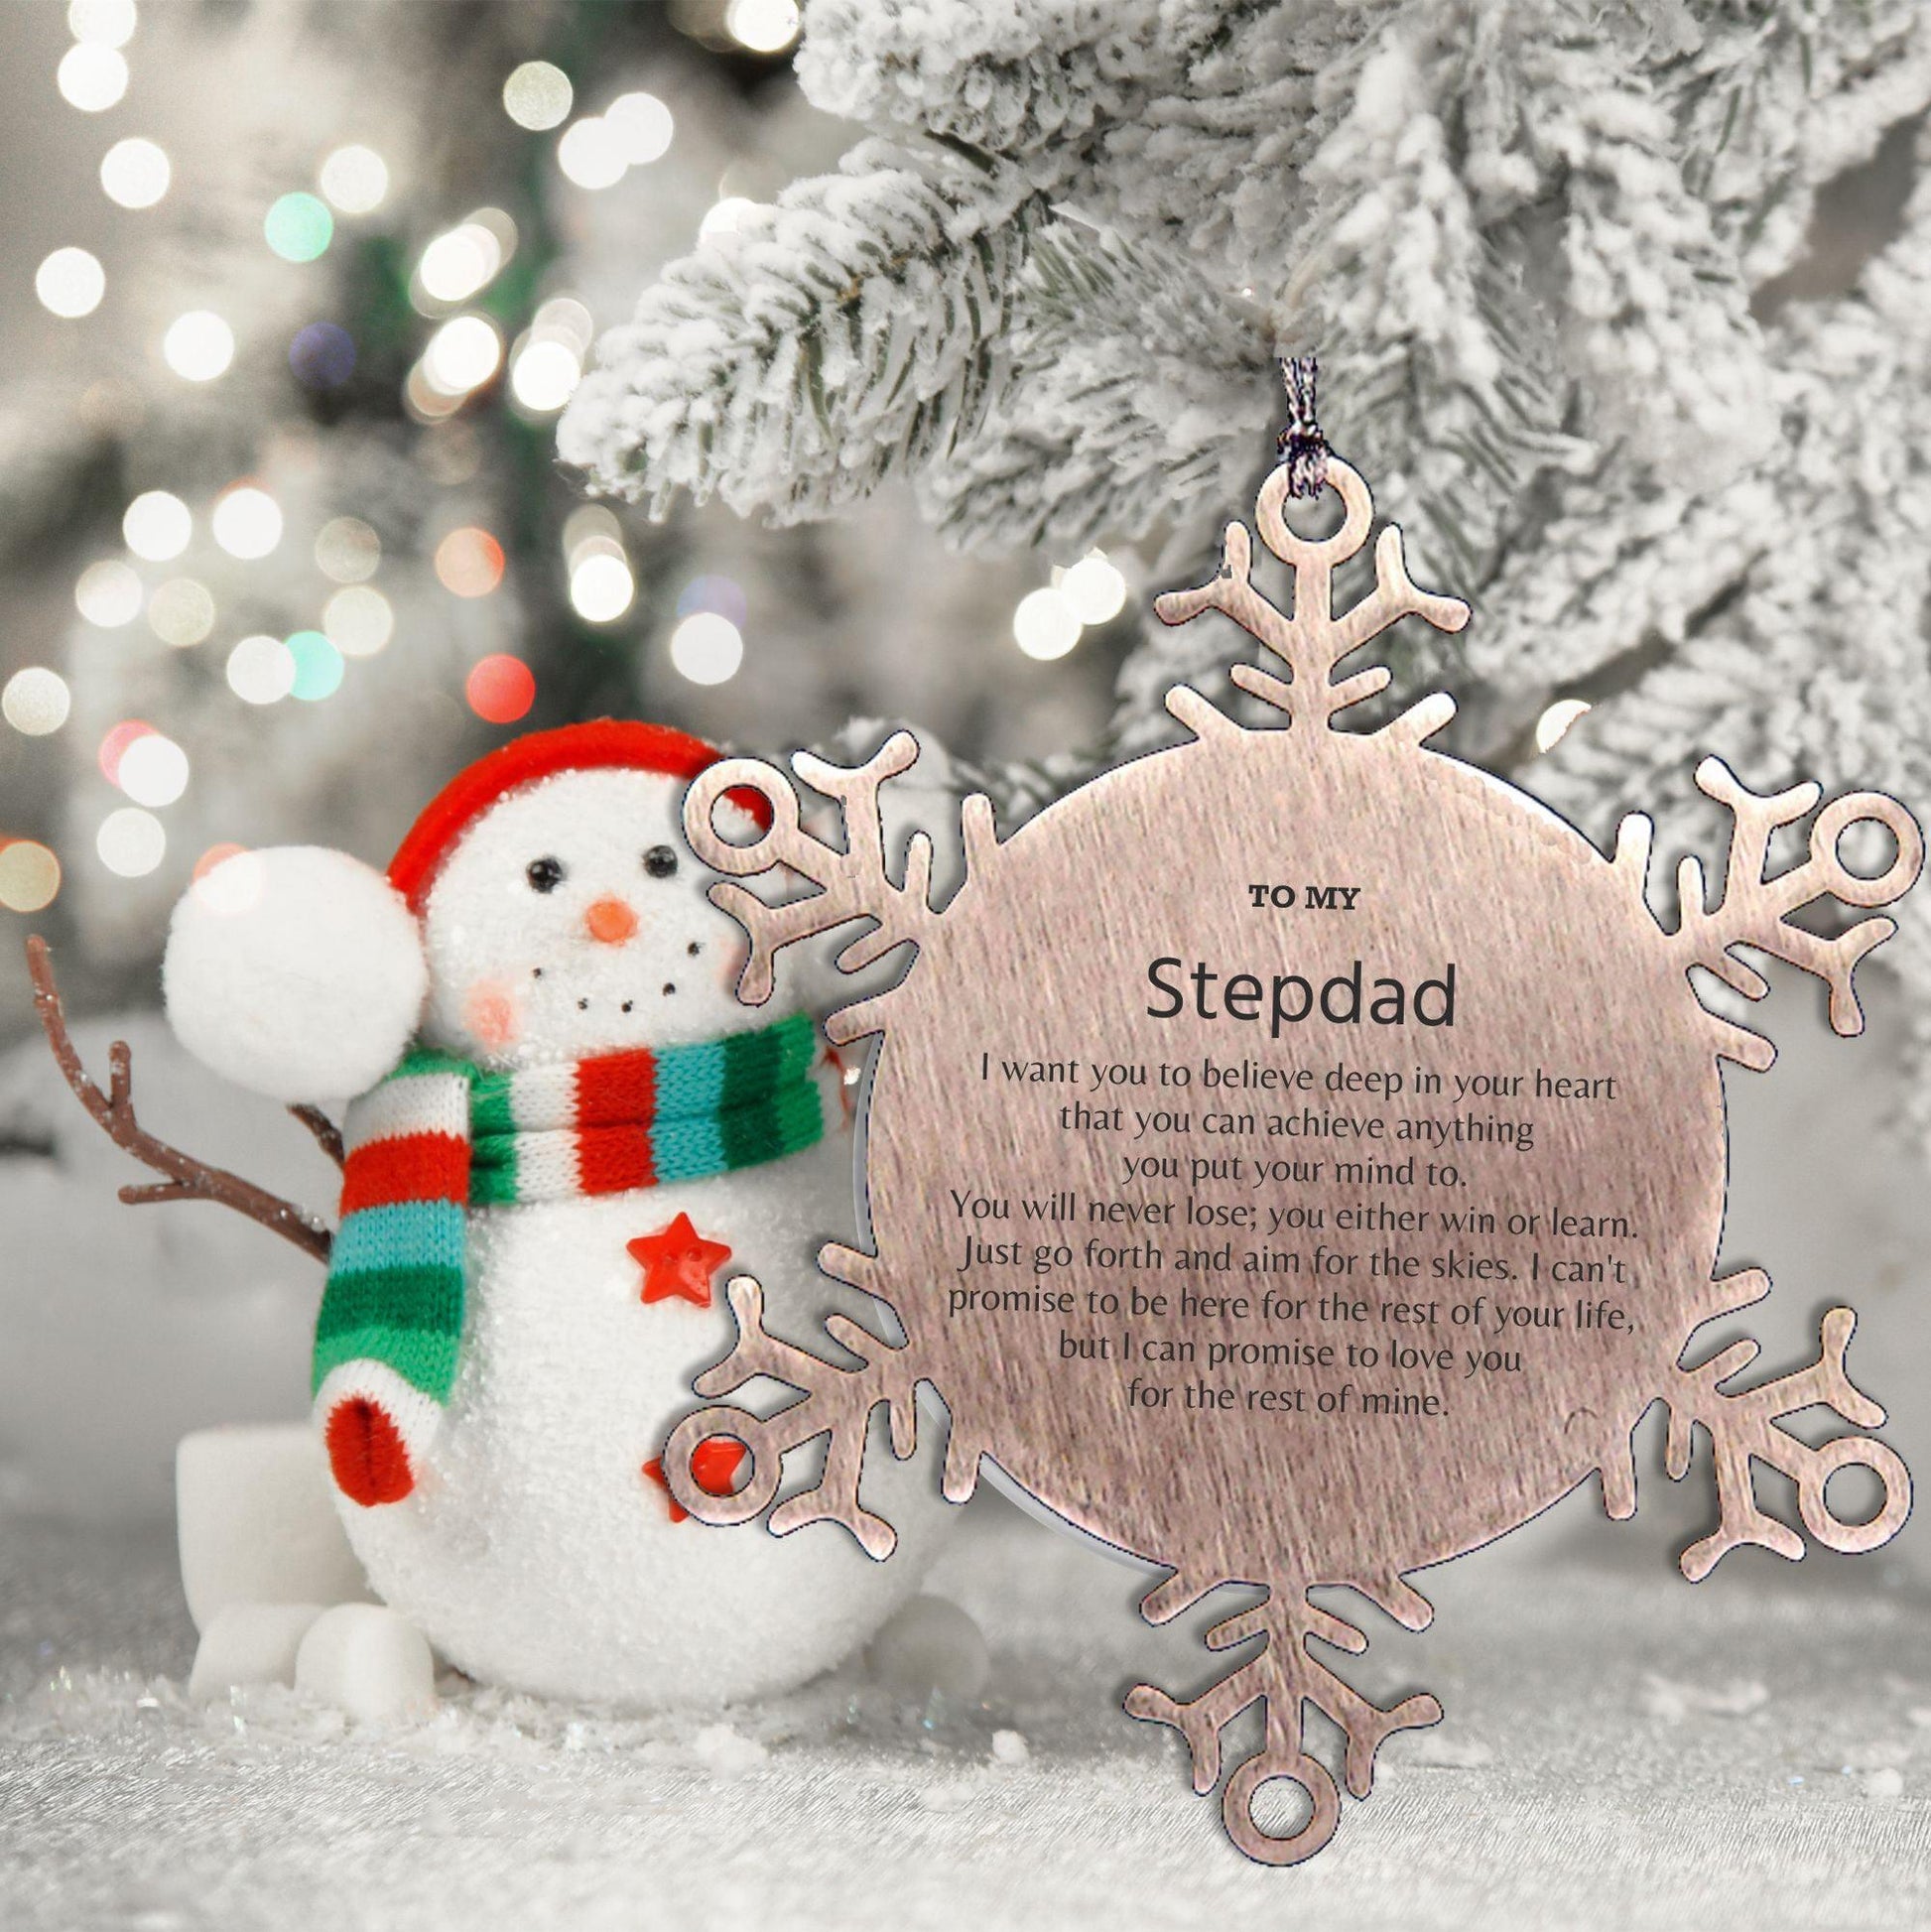 Motivational Stepdad Snowflake Ornament, Stepdad I can promise to love you for the rest of mine, Christmas Birthday Gift - Mallard Moon Gift Shop